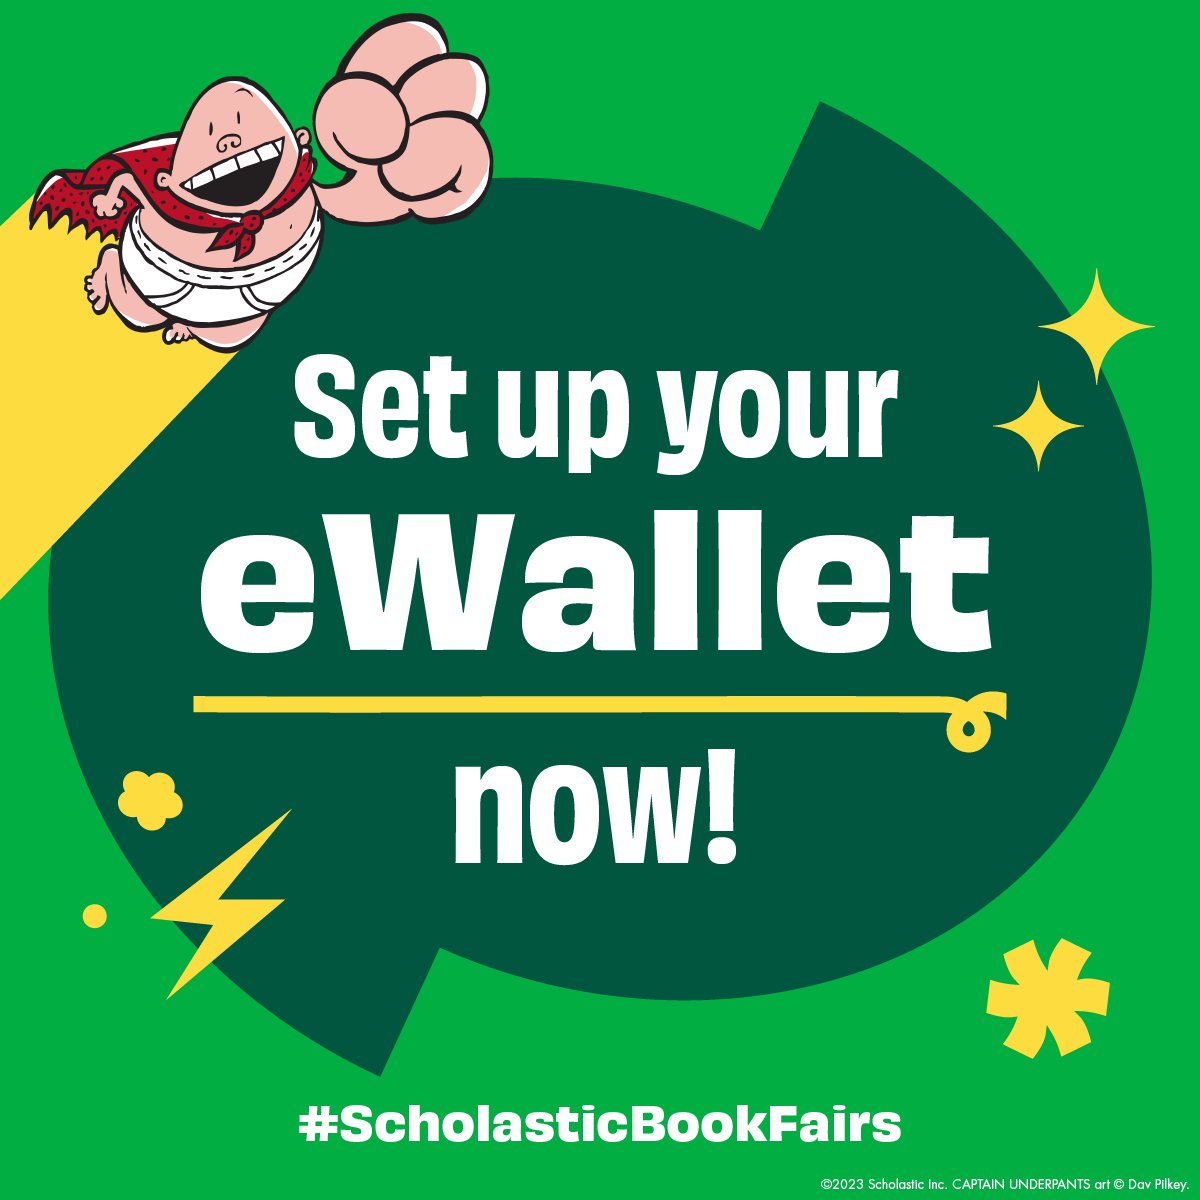 🐎join us for our Fall #ScholasticBookFair 📚Oct 31st-Nov 2nd set up your e-wallet now @Scholastic visit our @stipesstallions online fair #bookloversunite scholastic.com/bf/stipeseleme…